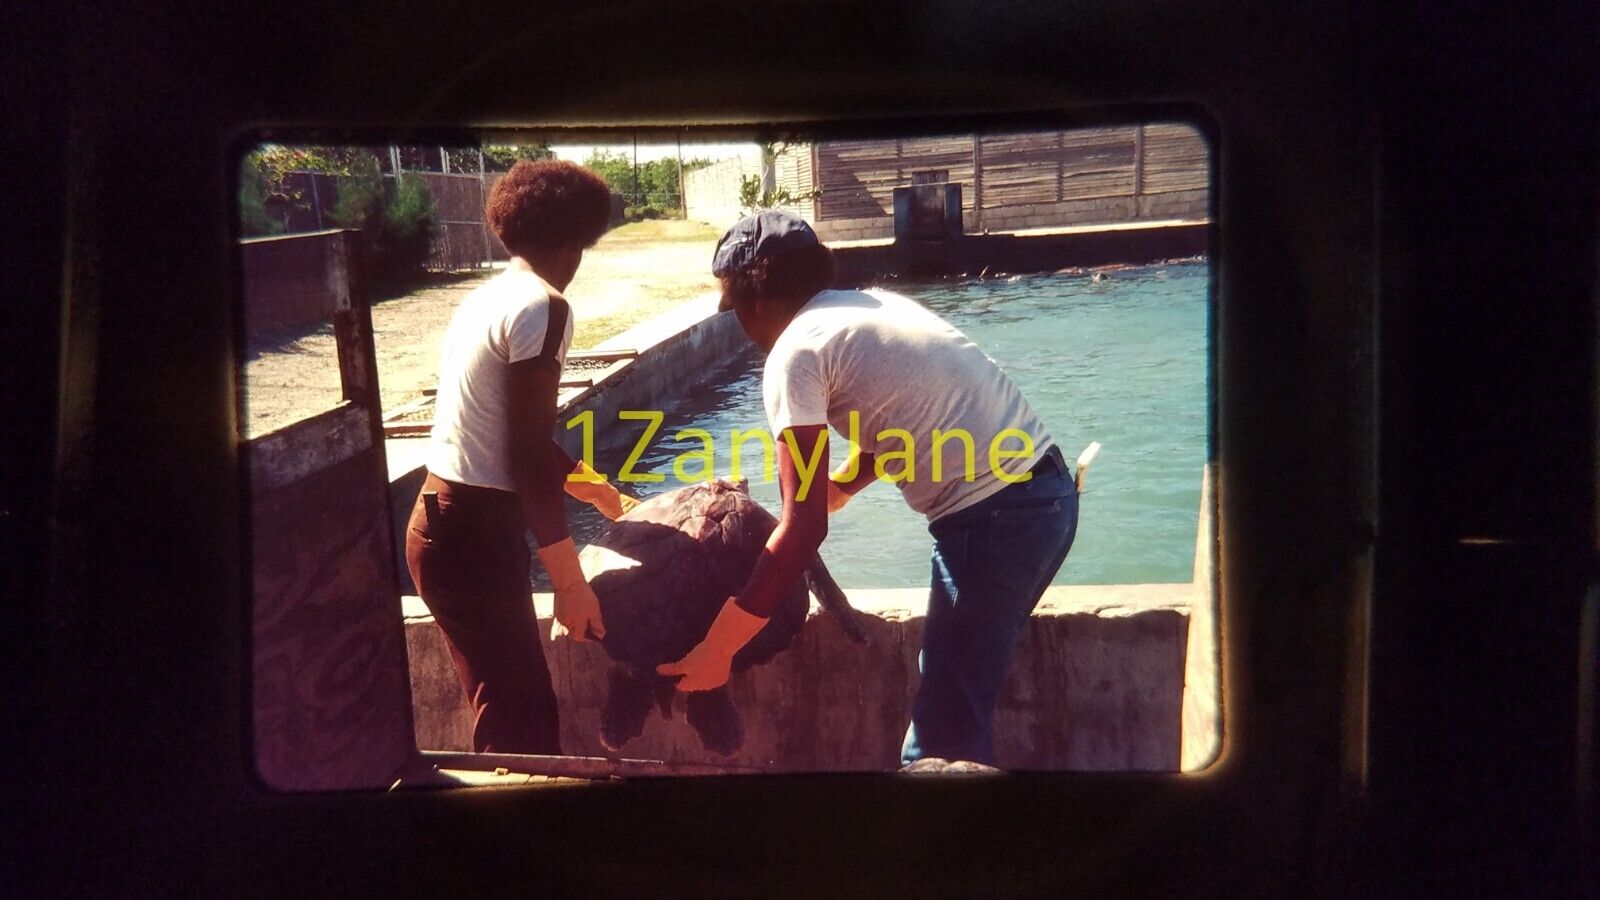 1217 vintage 35MM SLIDE photo 2 WORKERS PUTTING TURTLE IN WATER AT TURTLE FARM